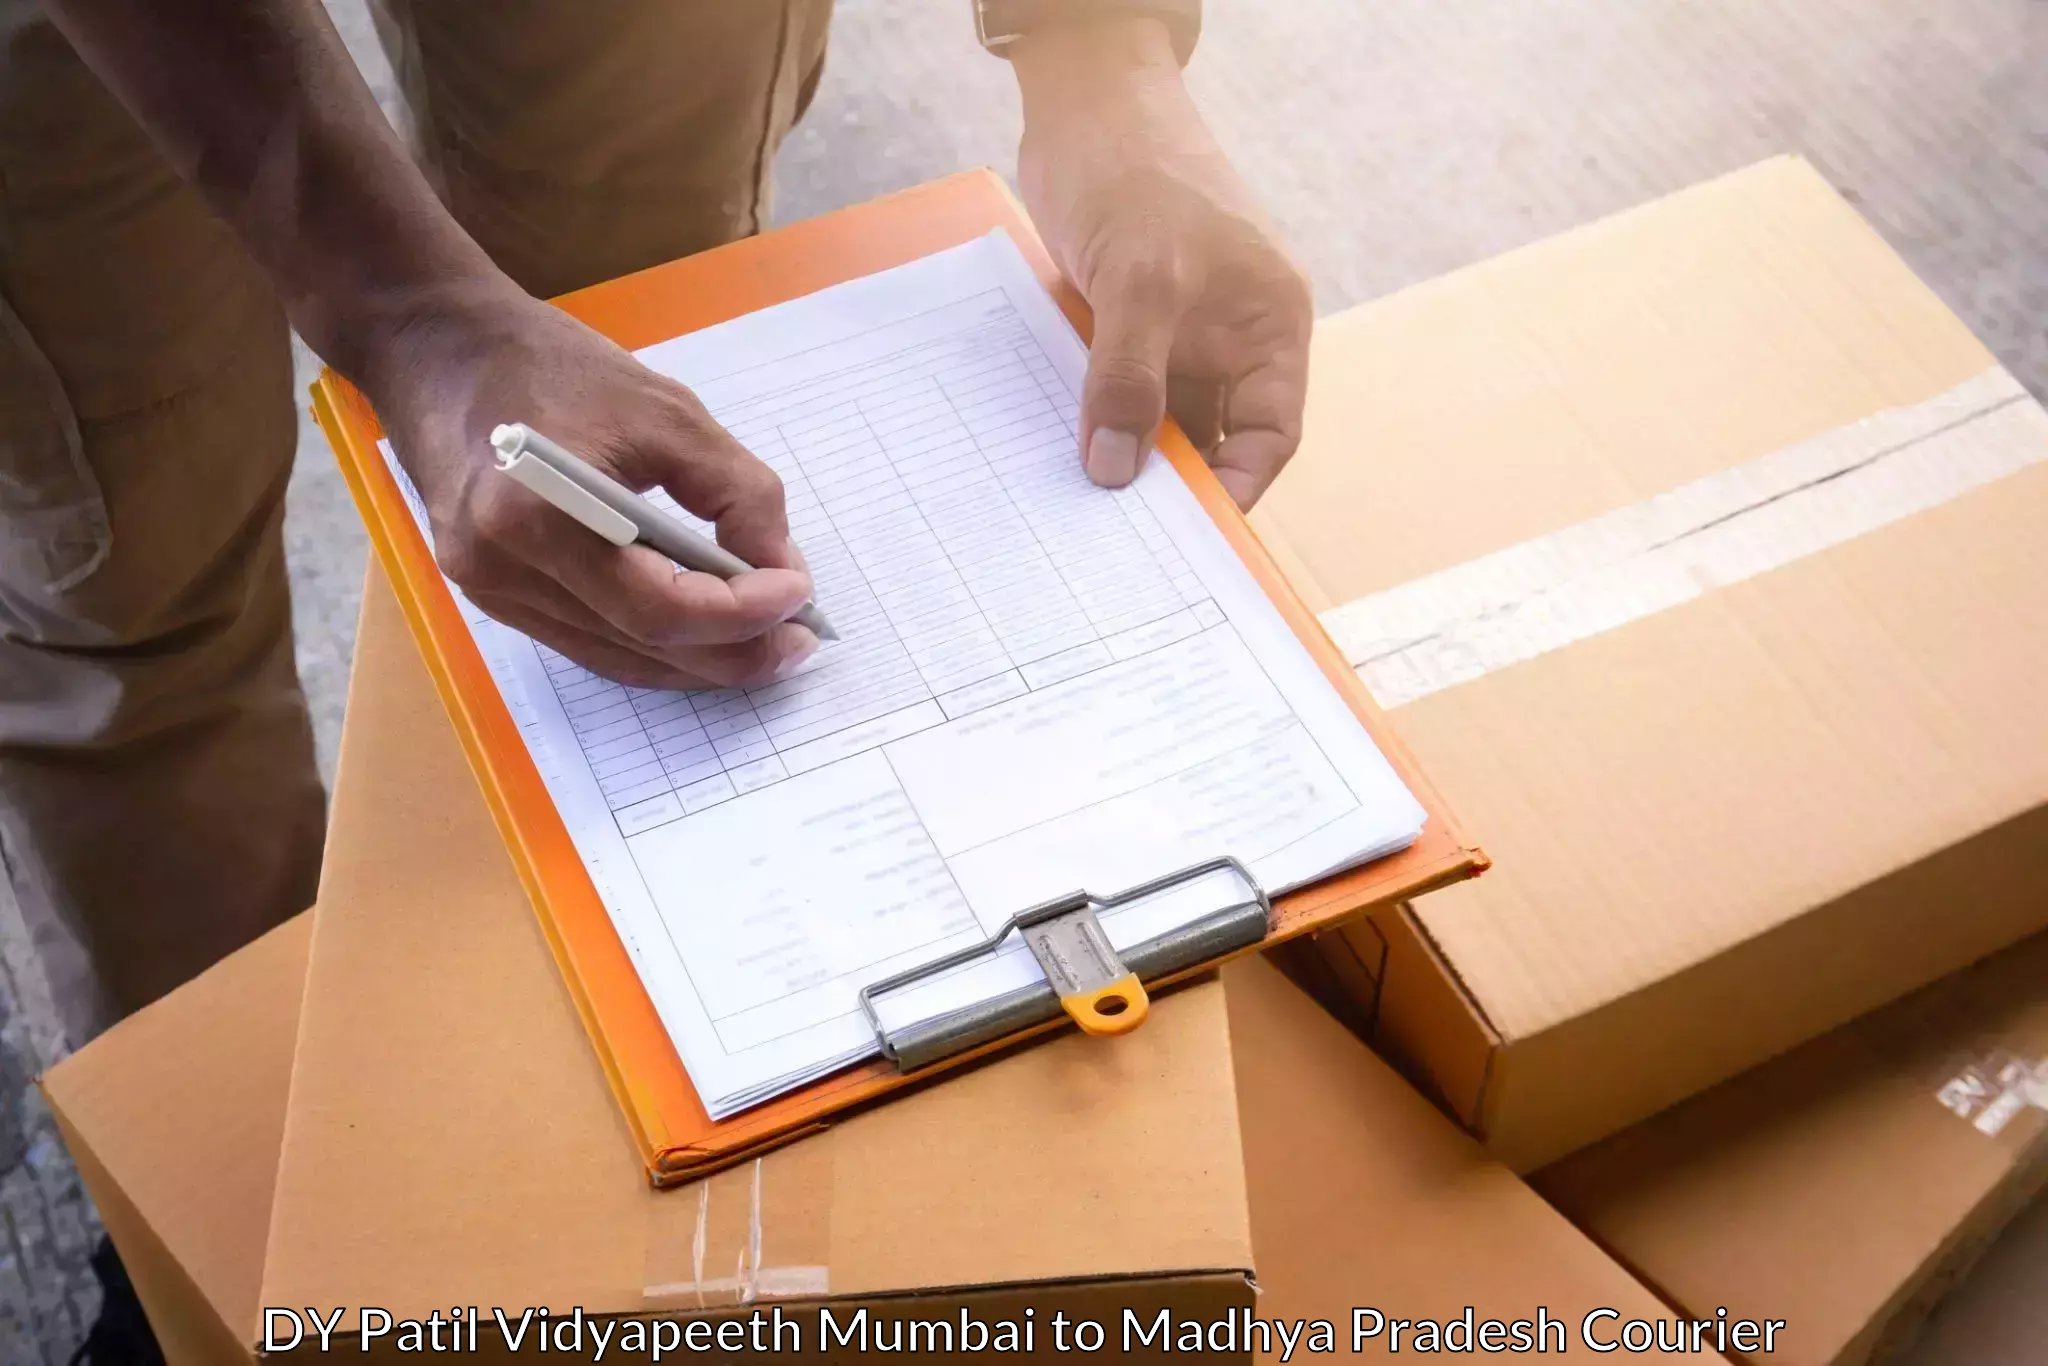 Specialized courier services DY Patil Vidyapeeth Mumbai to Ranchha